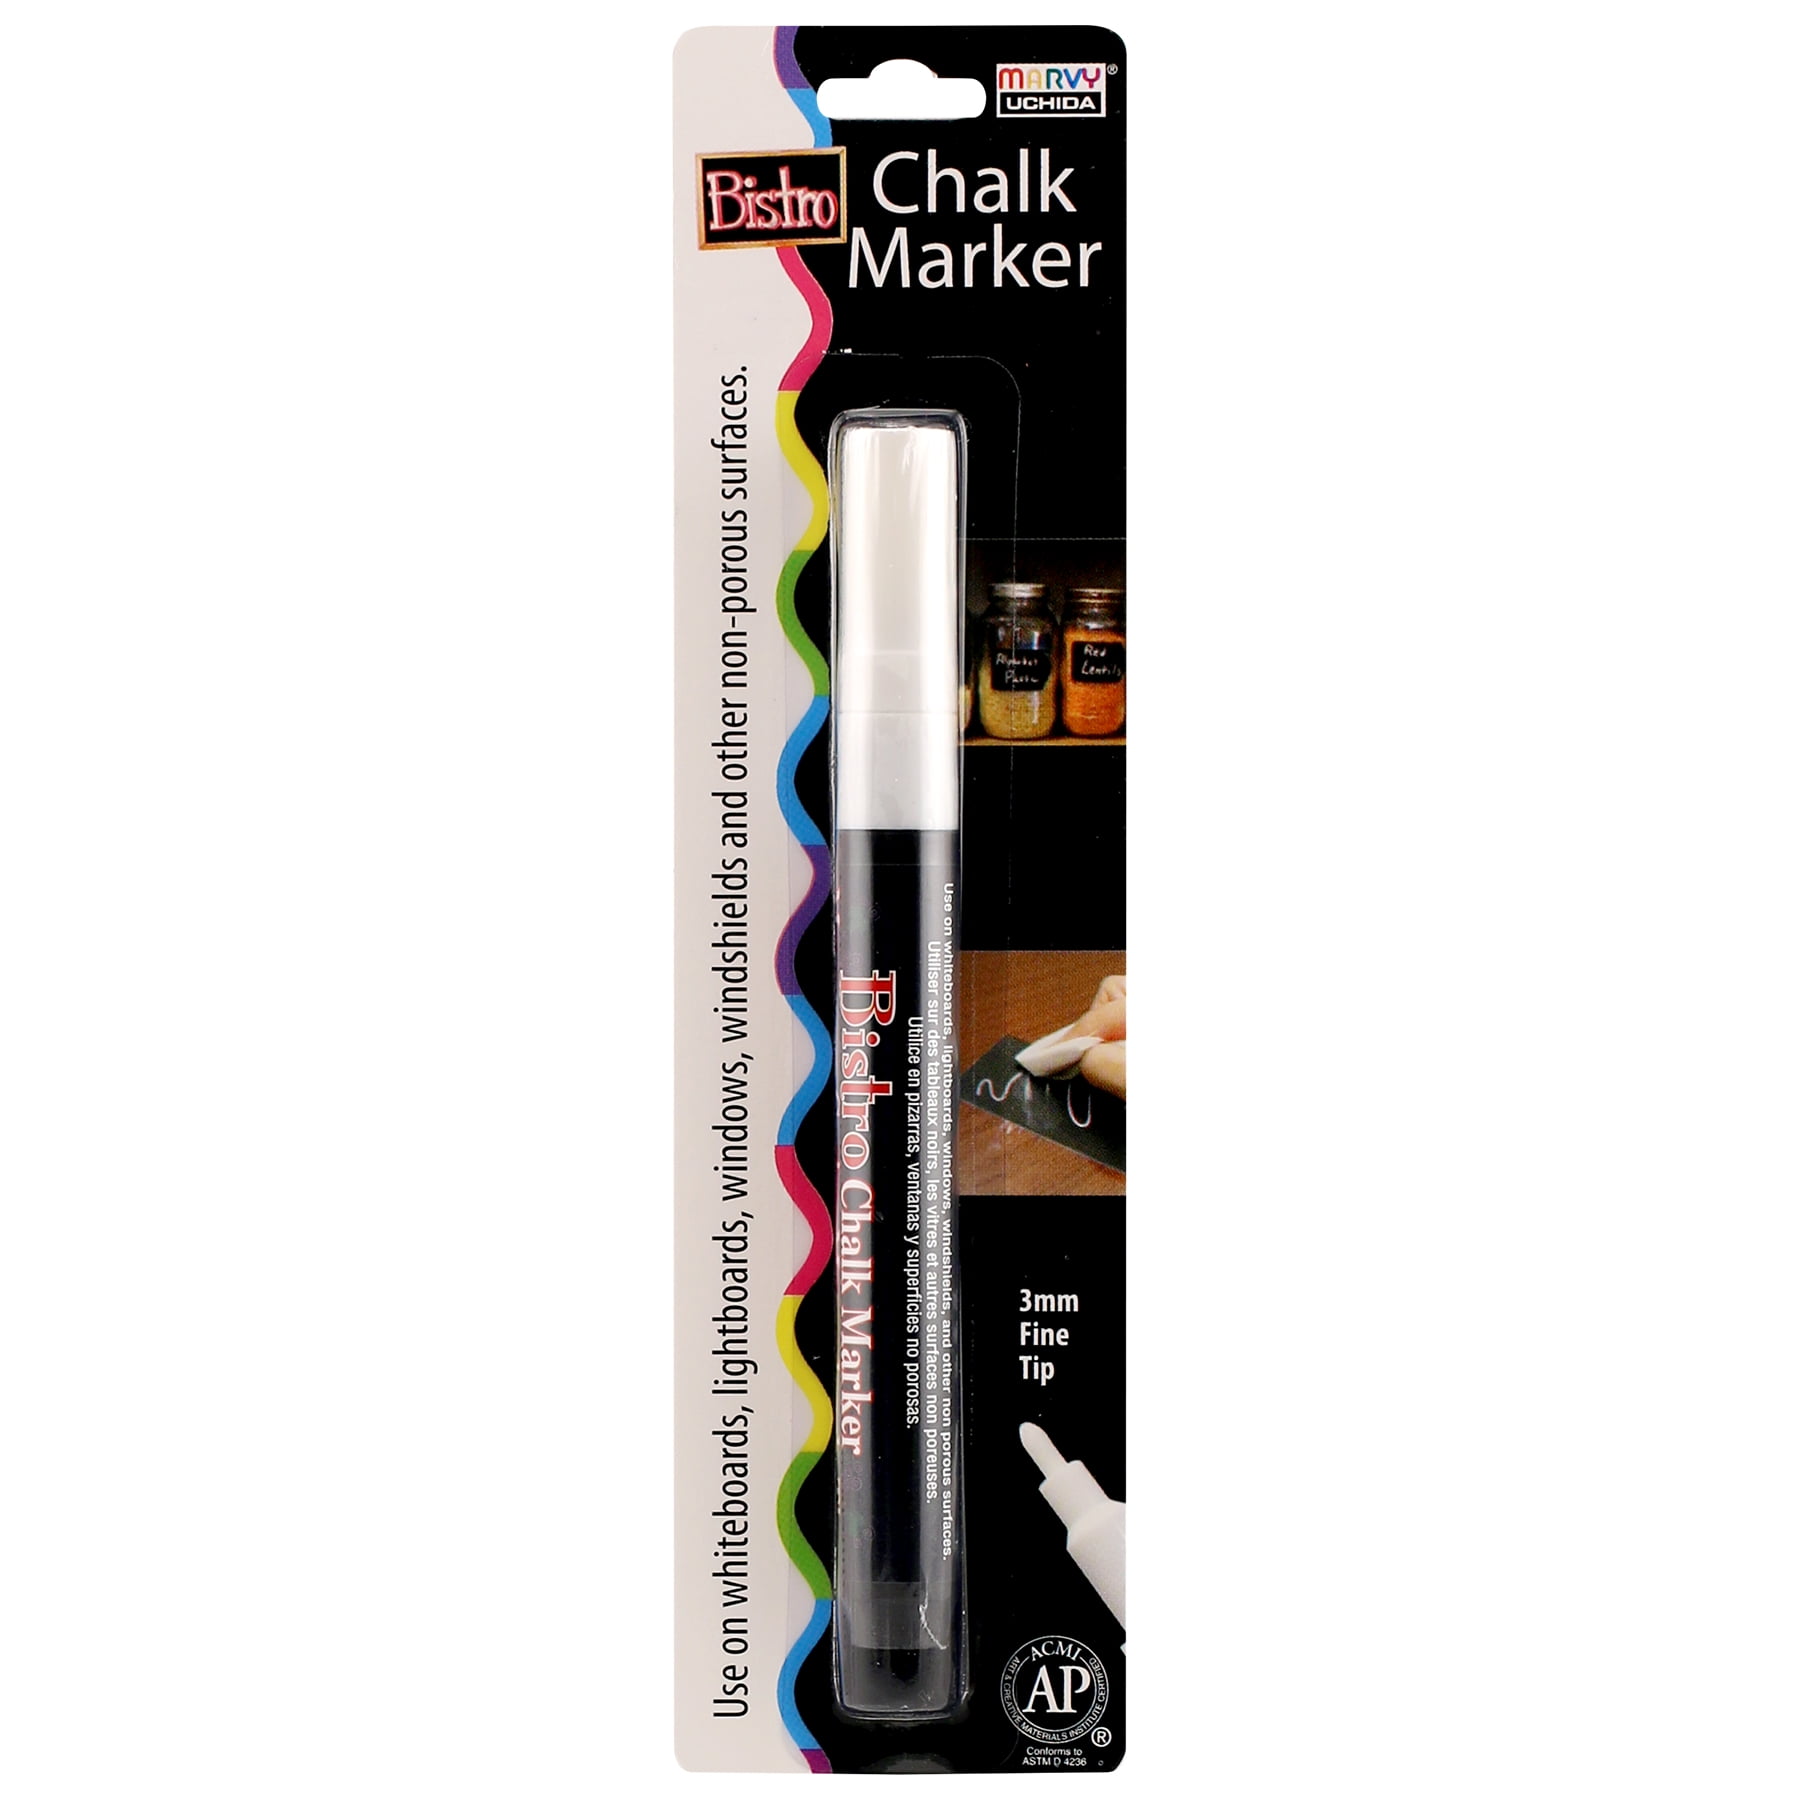 DecoColor Premium Oil Based Paint Marker Carded-Chisel Tip Silver Marvy 